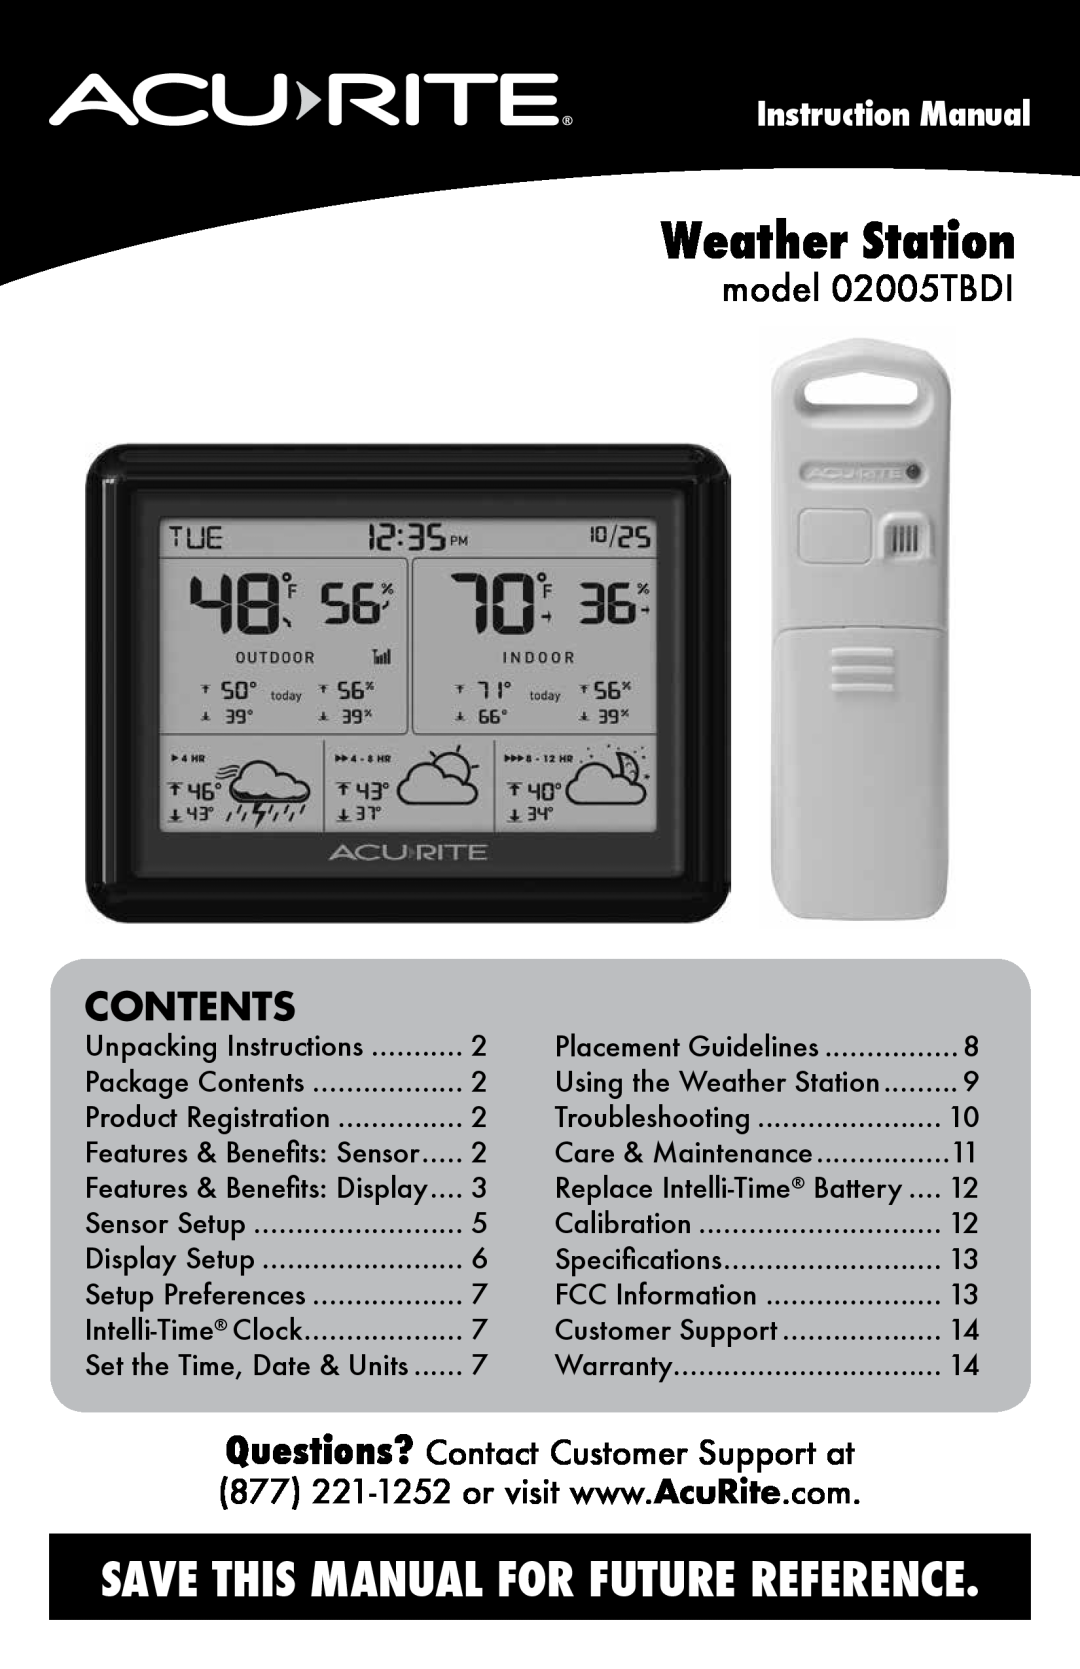 Acu-Rite instruction manual Contents, model 02005TBDI, Instruction Manual, Weather Station 